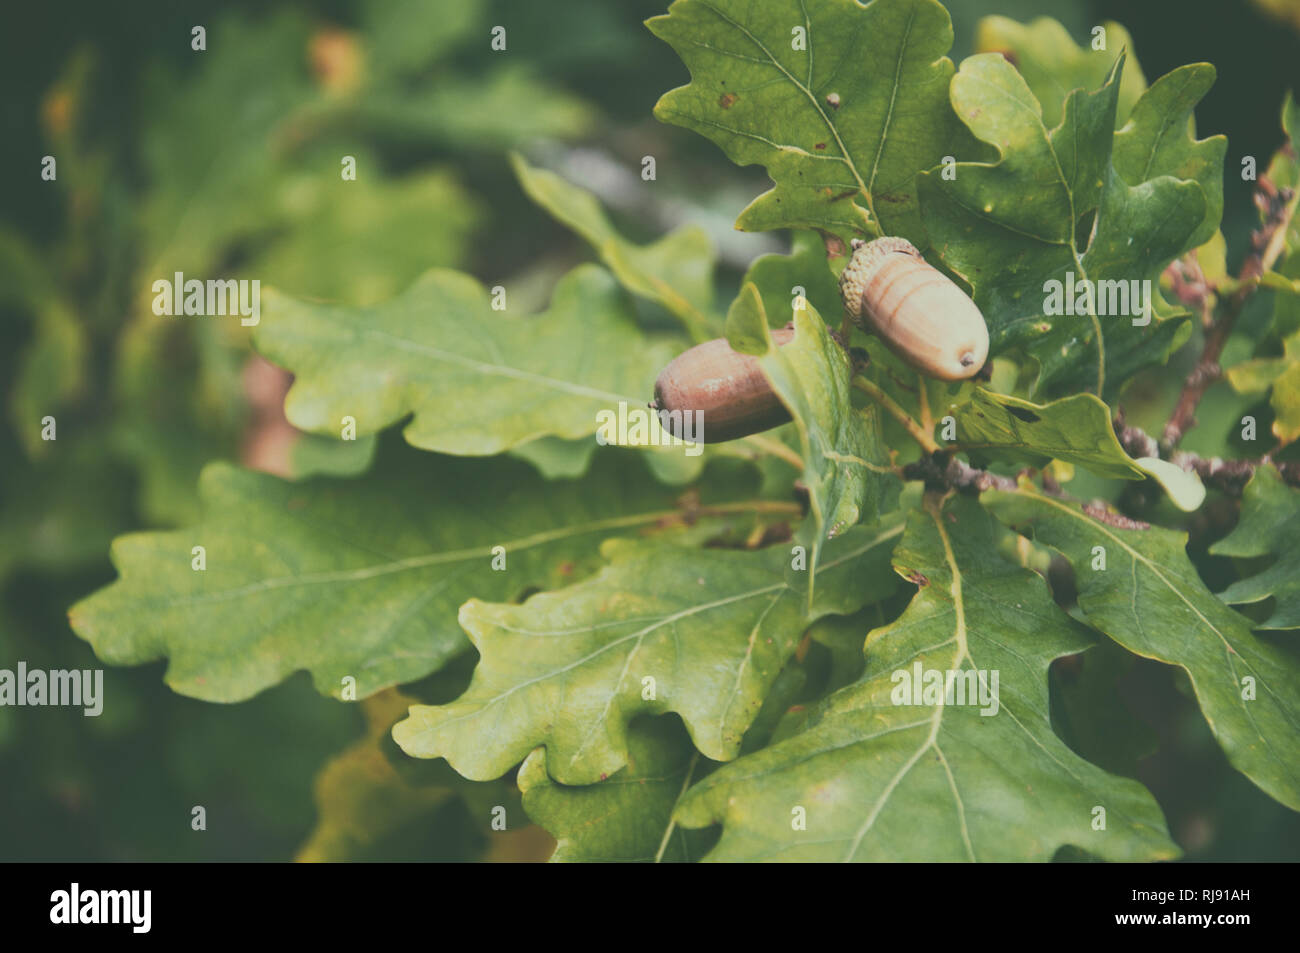 Acorns fruits. Close up acorns fruits in the oak nut tree against blurred green background. Stock Photo